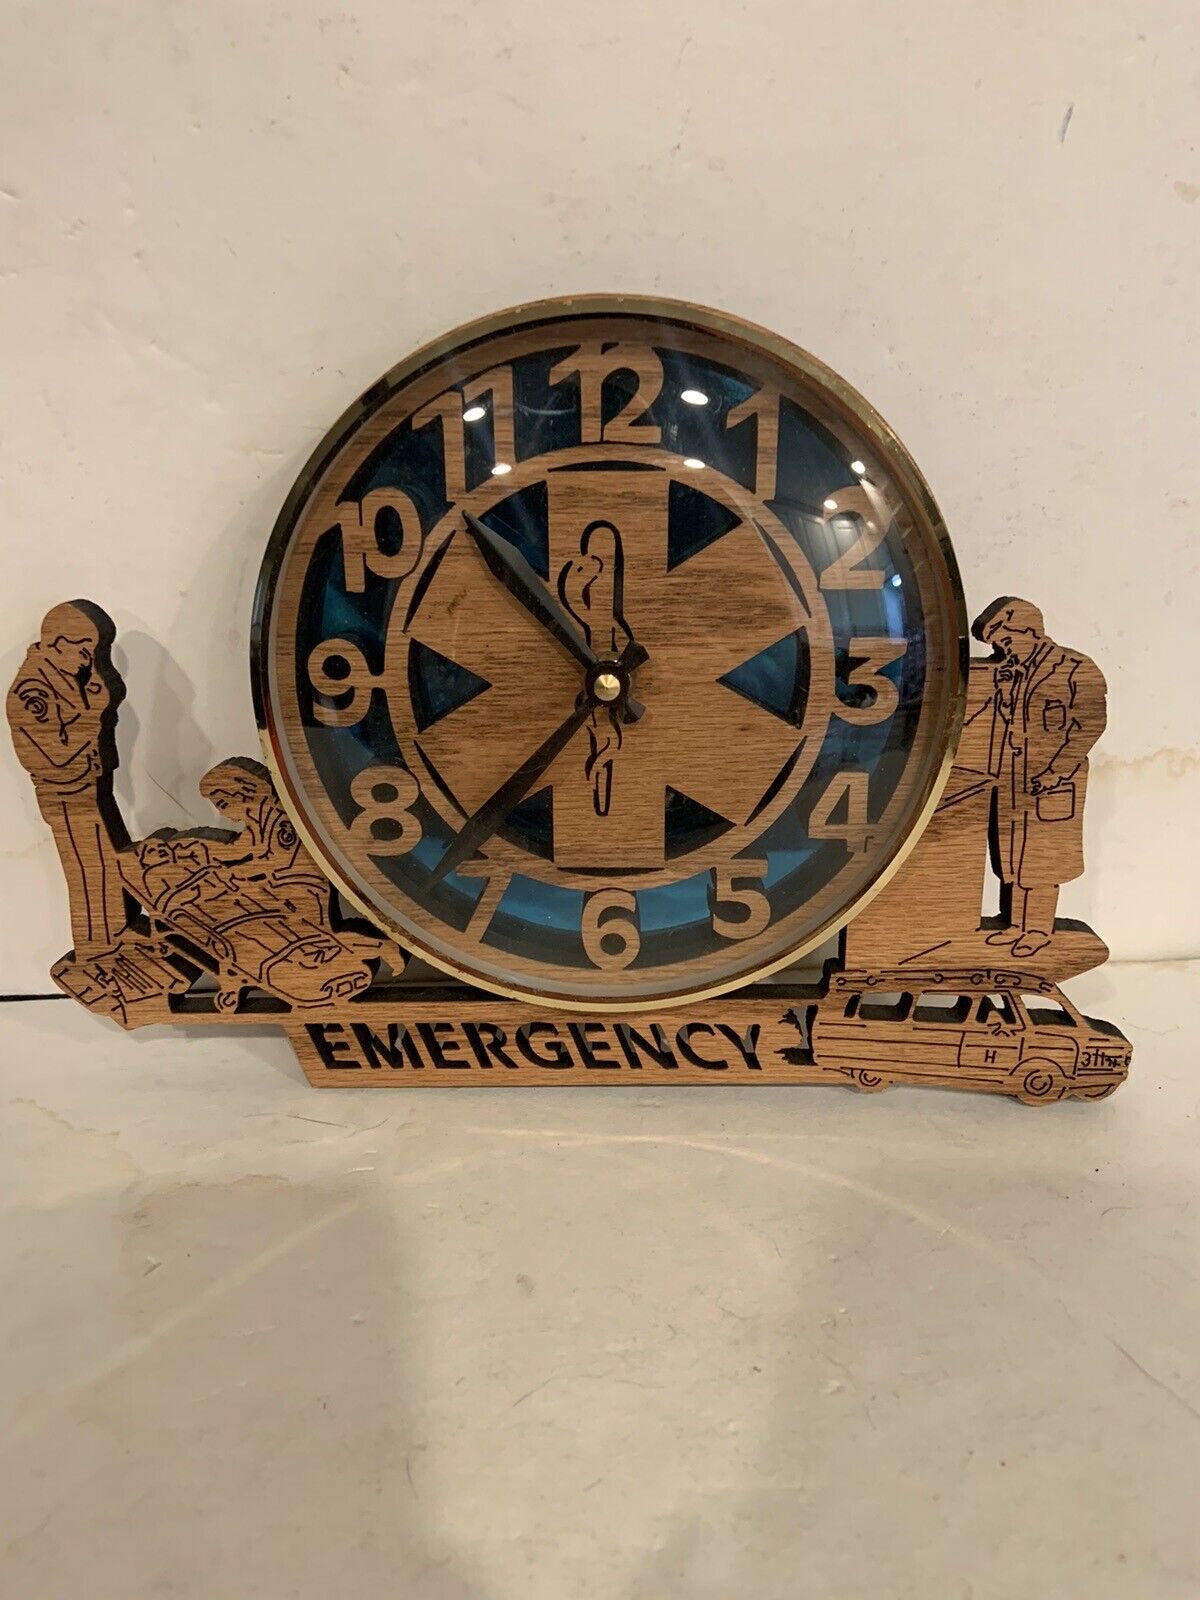 Vntg Wooden Medical Personnel Wall Clock Handmade Emergency Team Tested RARE